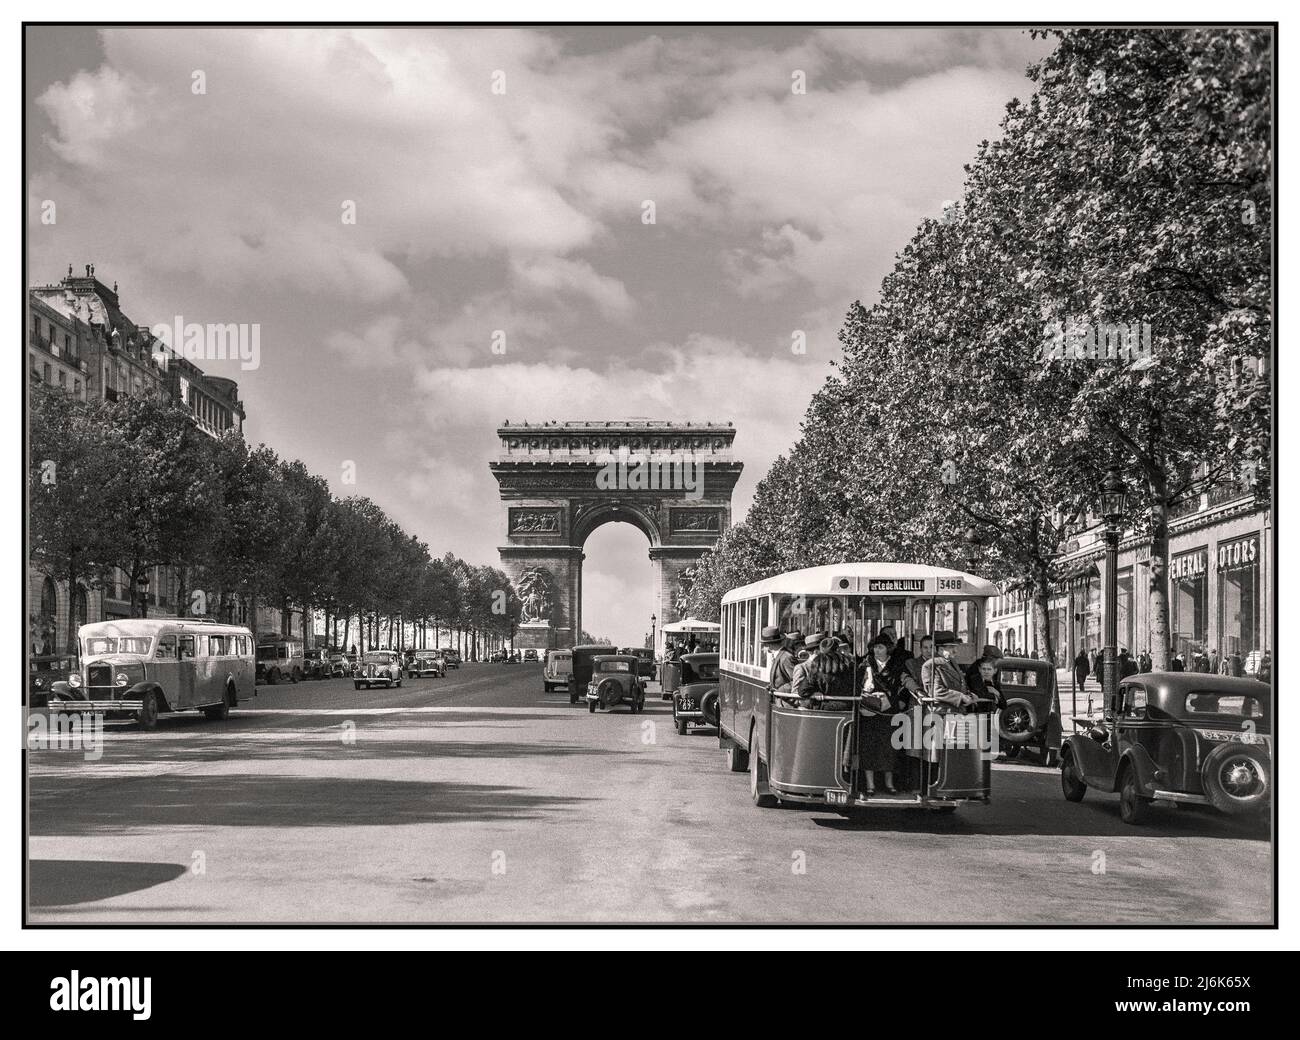 PARIS Vintage 1930's retro Paris 1936 Arc de Triomphe and traffic on the Champs-Elysees including Parisian Autobus and people wearing the styles and fashion of the day. Pre WW2 Buses street scene archive French B&W Photographer Willem van de Poll Stock Photo